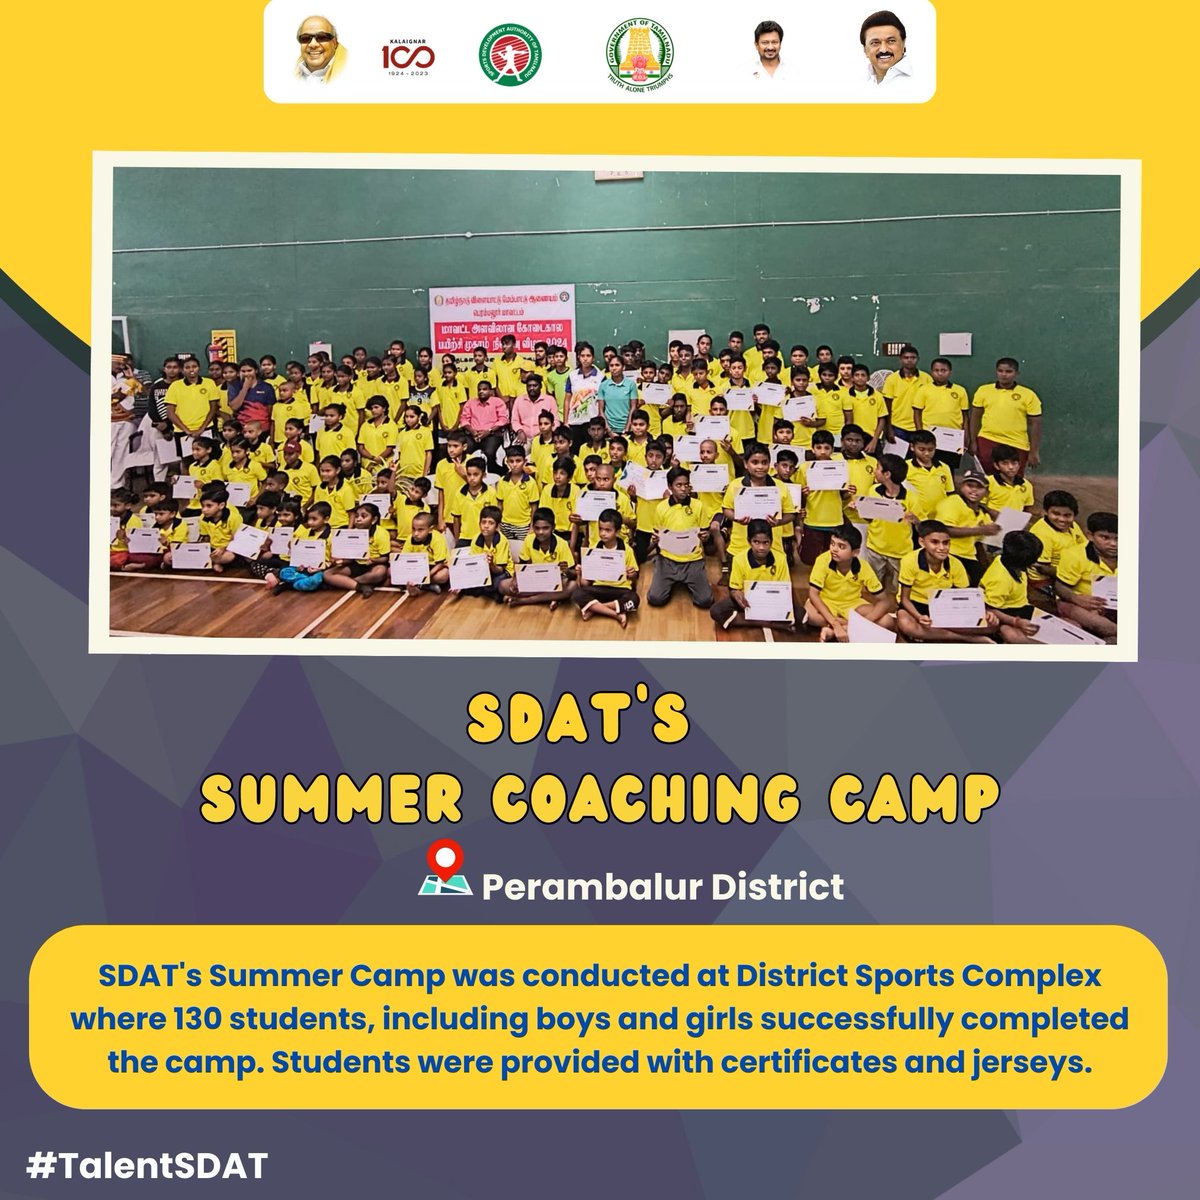 SDAT's Summer Coaching Camp was conducted at various District Sports Complexes and students who successfully completed the camp were provided with certificates and jerseys.

@CMOTamilnadu @Udhaystalin @TNDIPRNEWS

#SportsTN #TalentSDAT